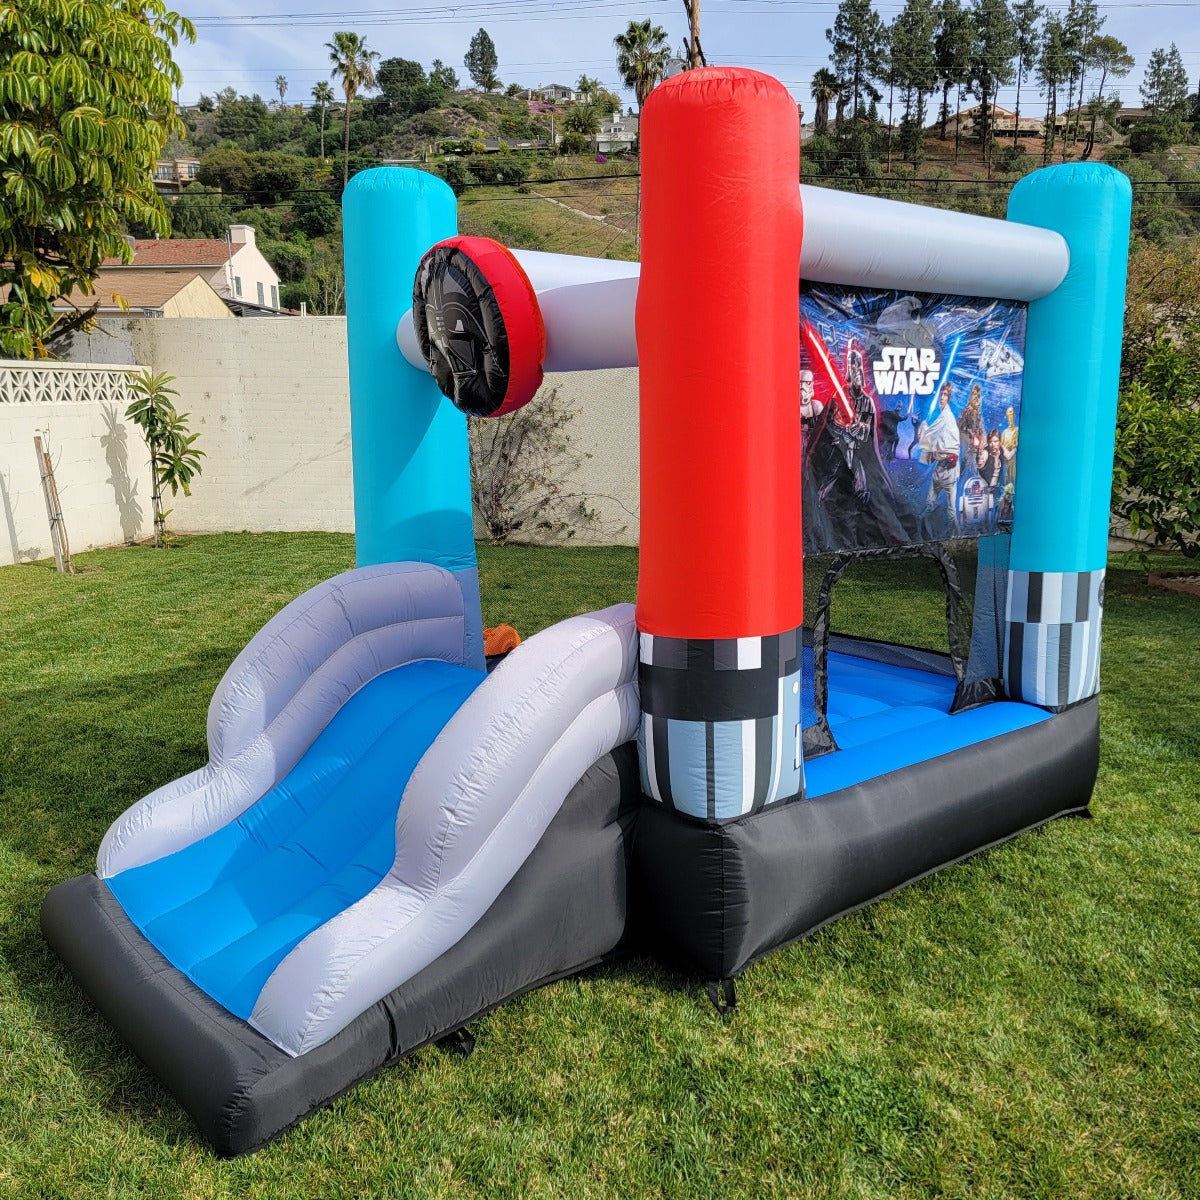 Star Wars bounce and slide inflatable - Funormous